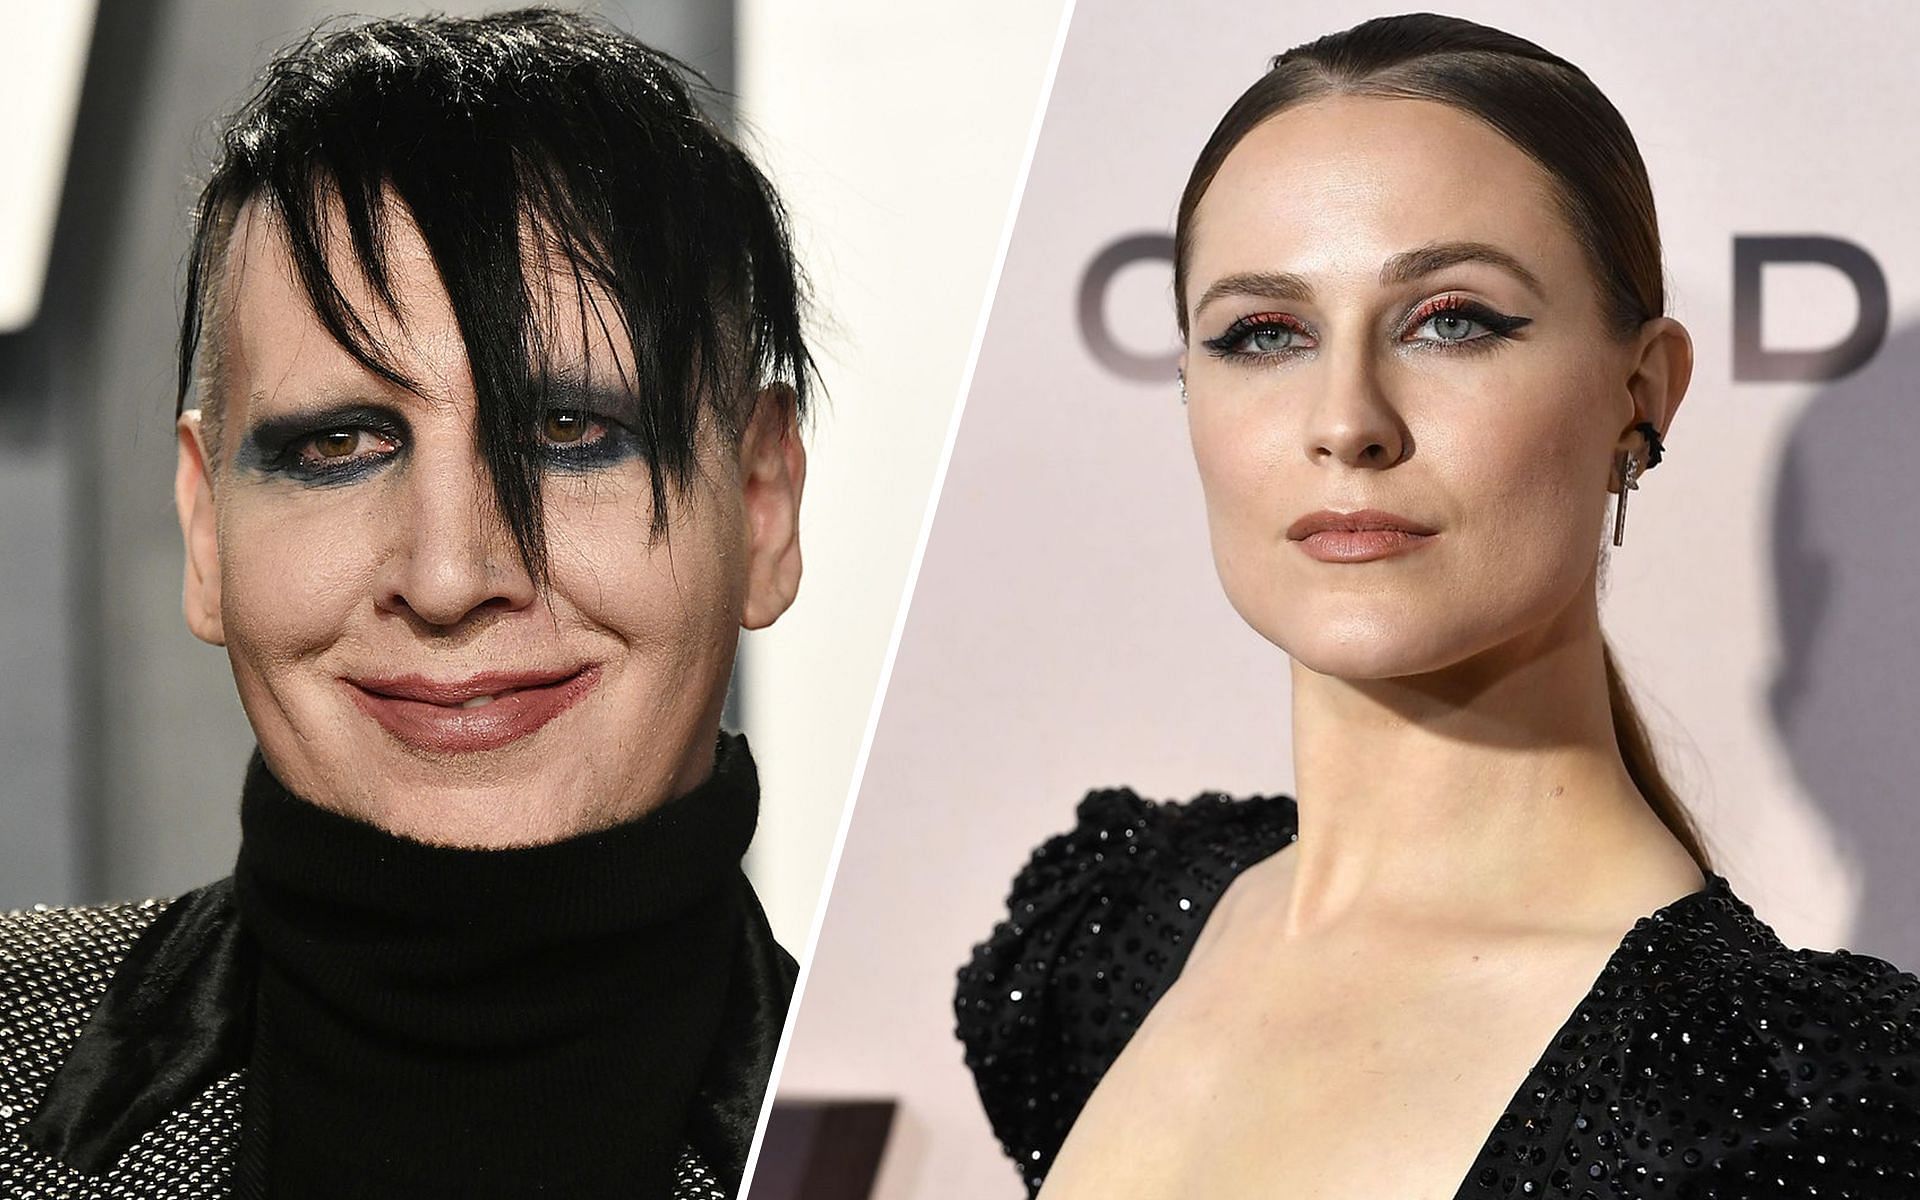 Marilyn Manson and Rachel Evan Wood were in a romantic relationship from 2007 to 2010. (Image via Sportskeeda)